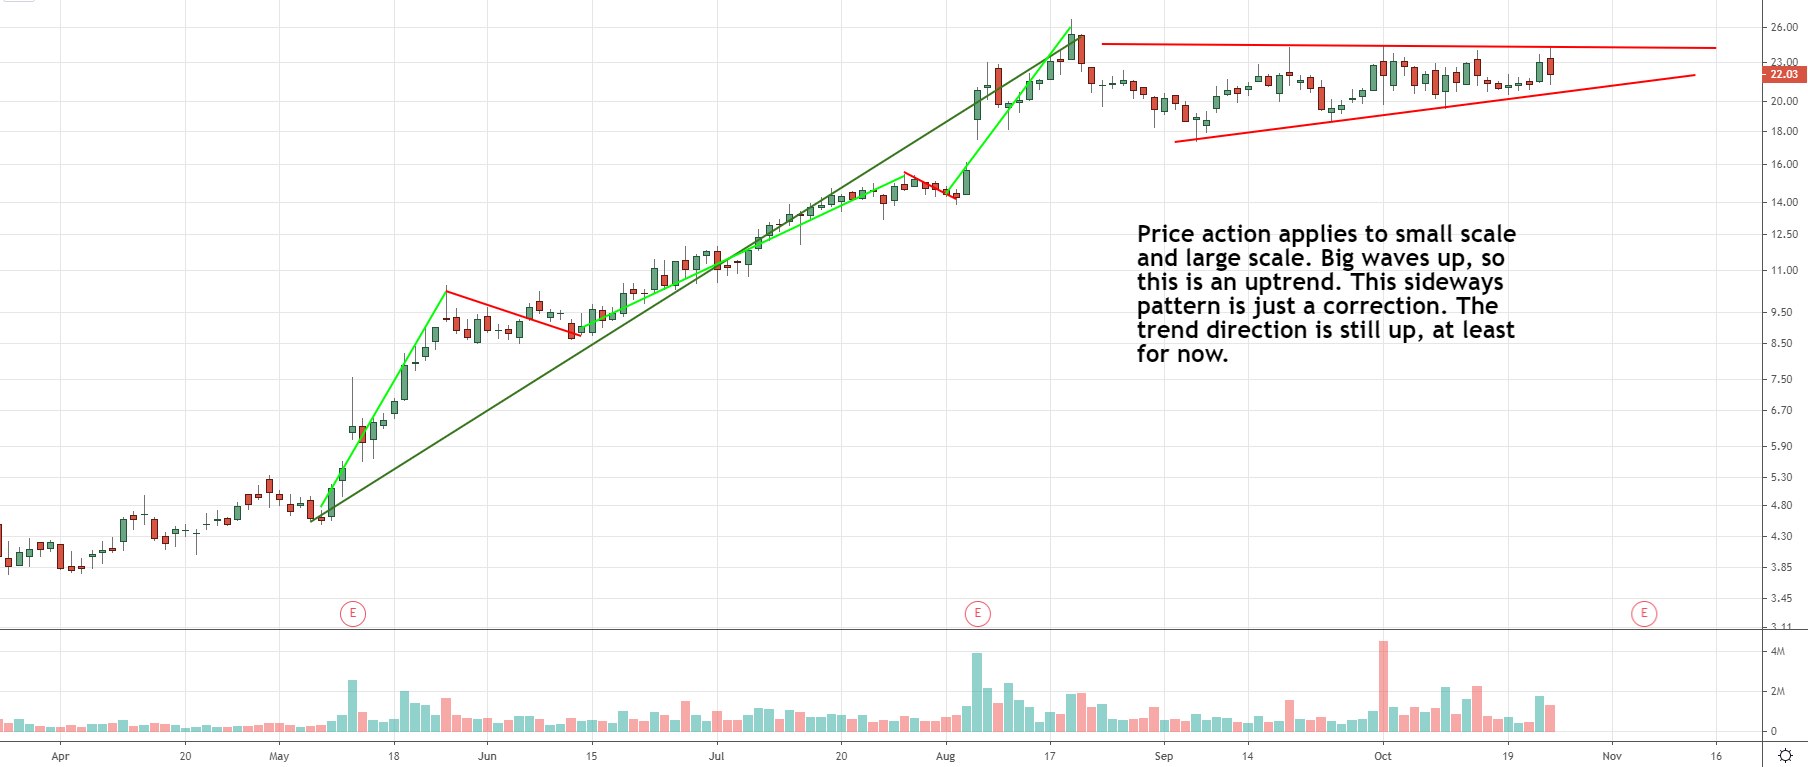 stock chart depicting large up waves during uptrend followed by sideways smaller correction